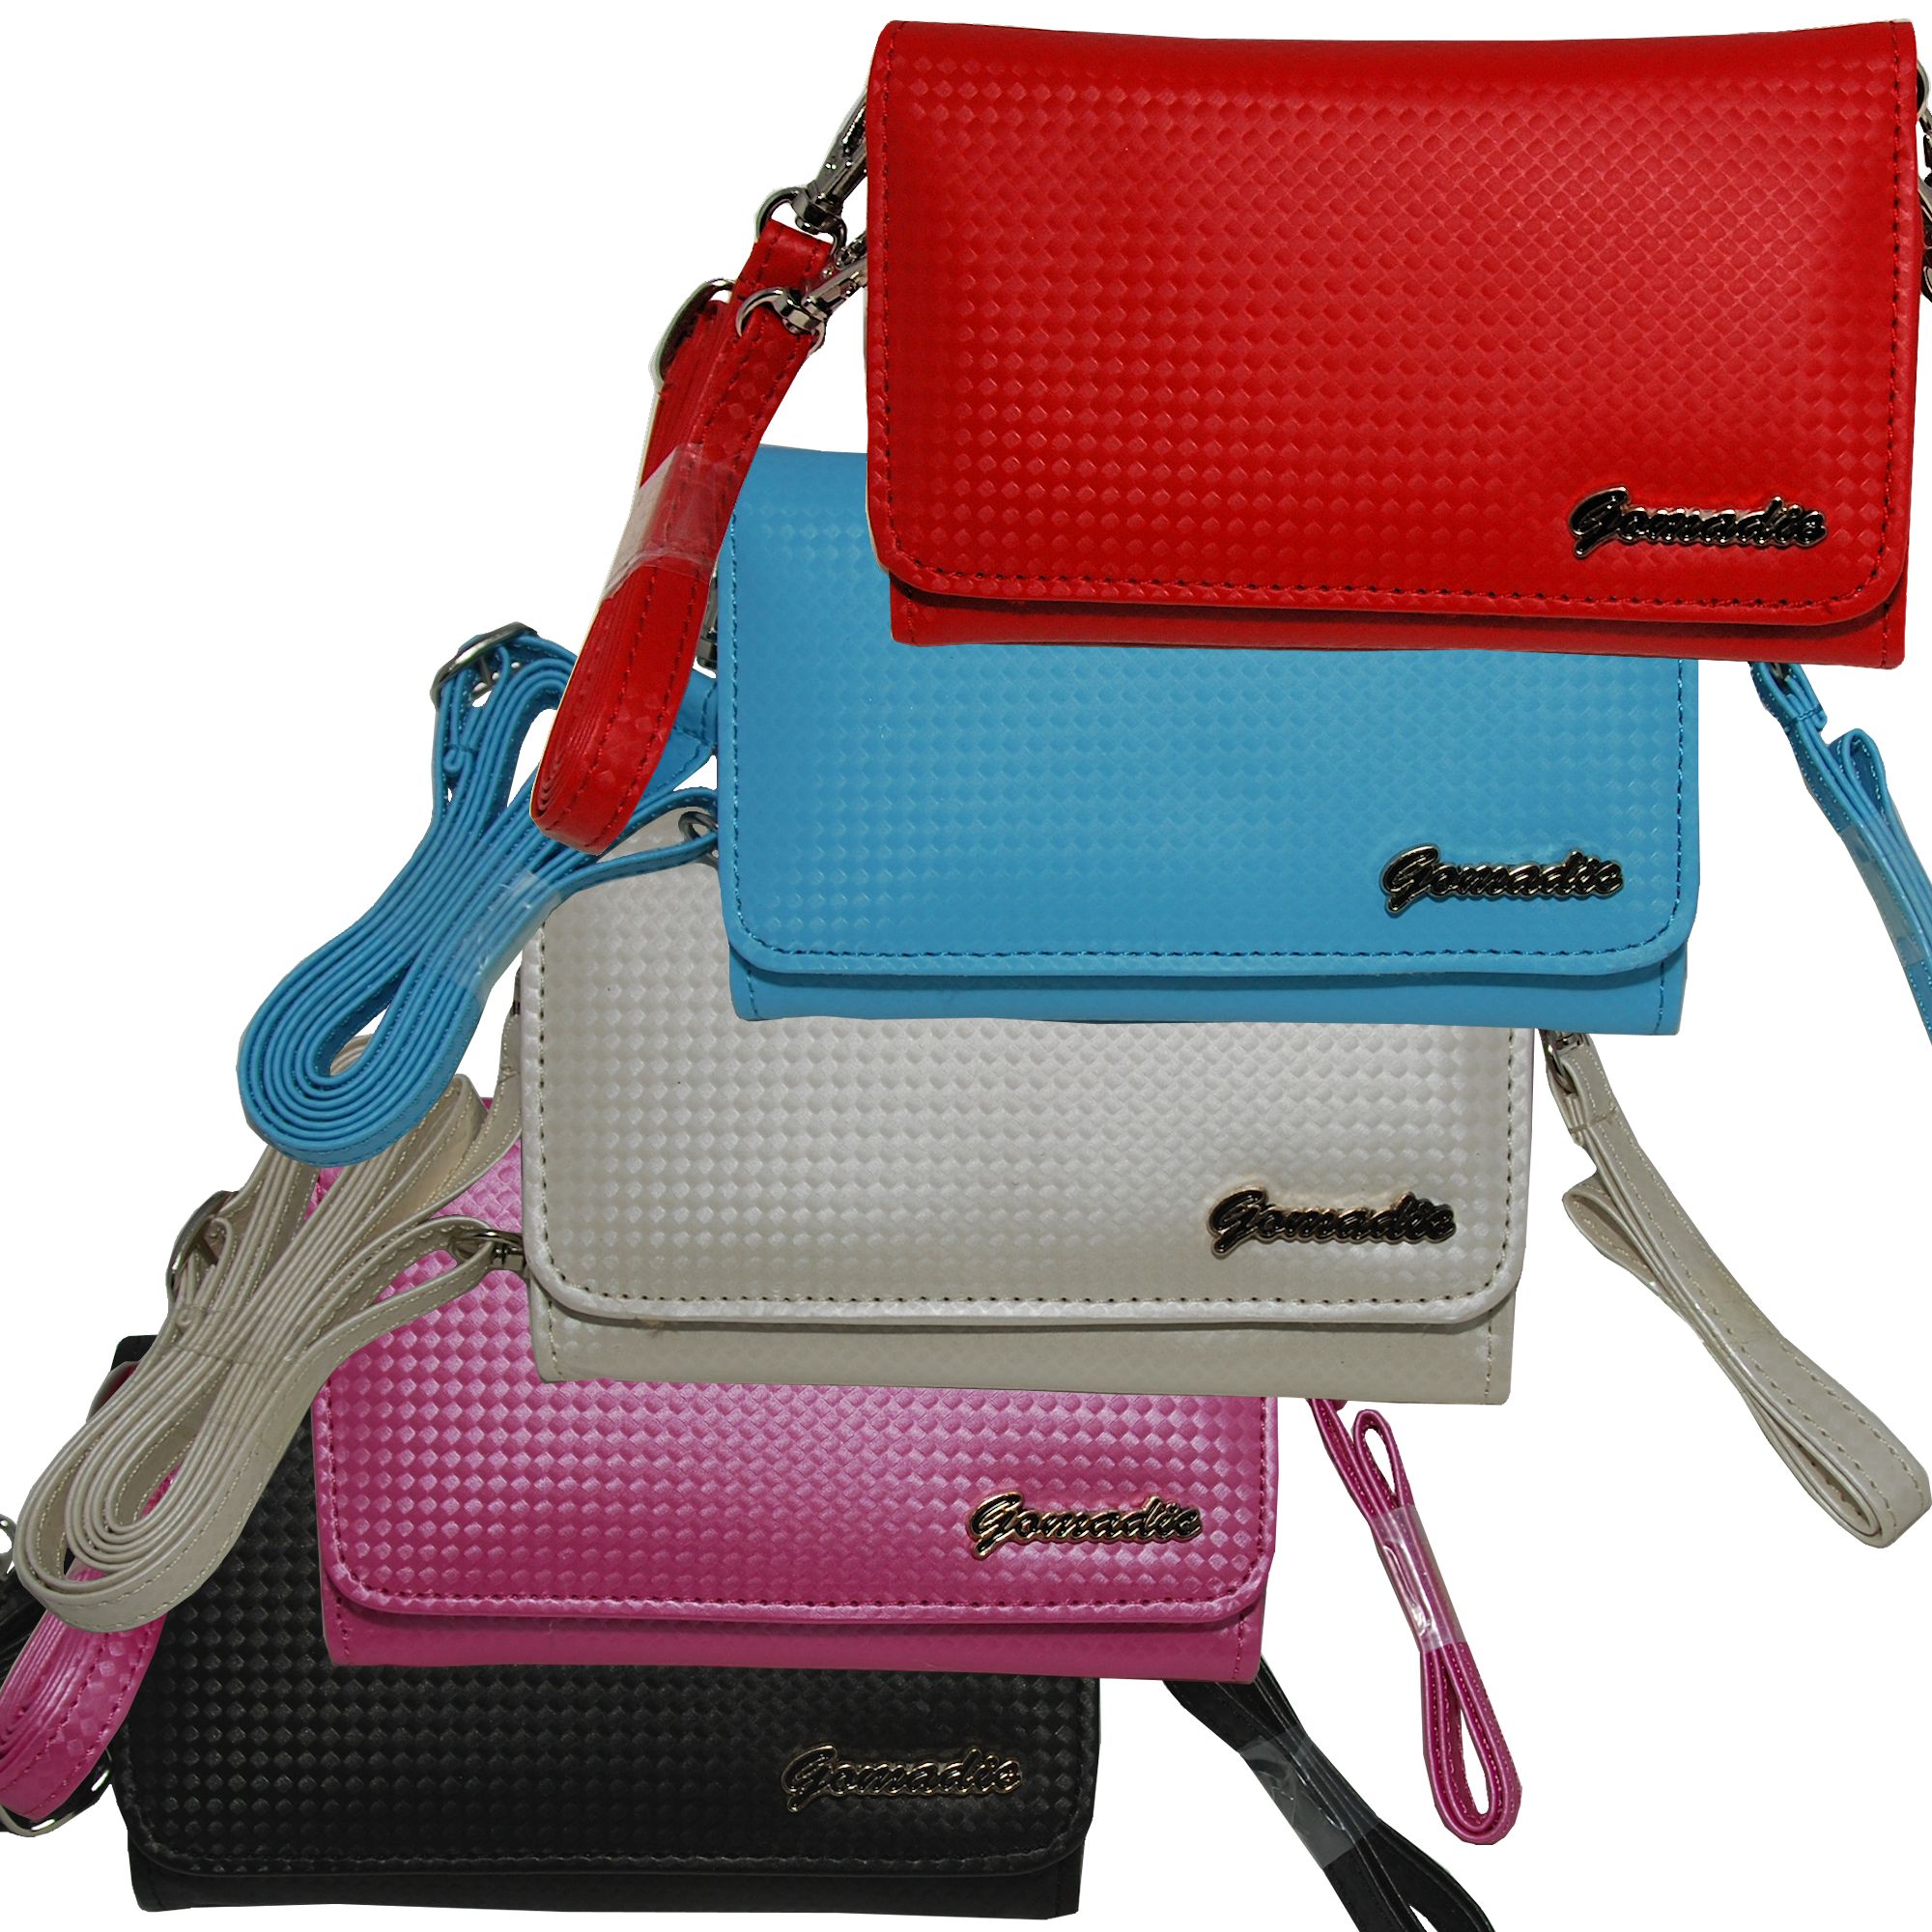 Purse Handbag Case for the Nokia 5610 5800  - Color Options Blue Pink White Black and Red